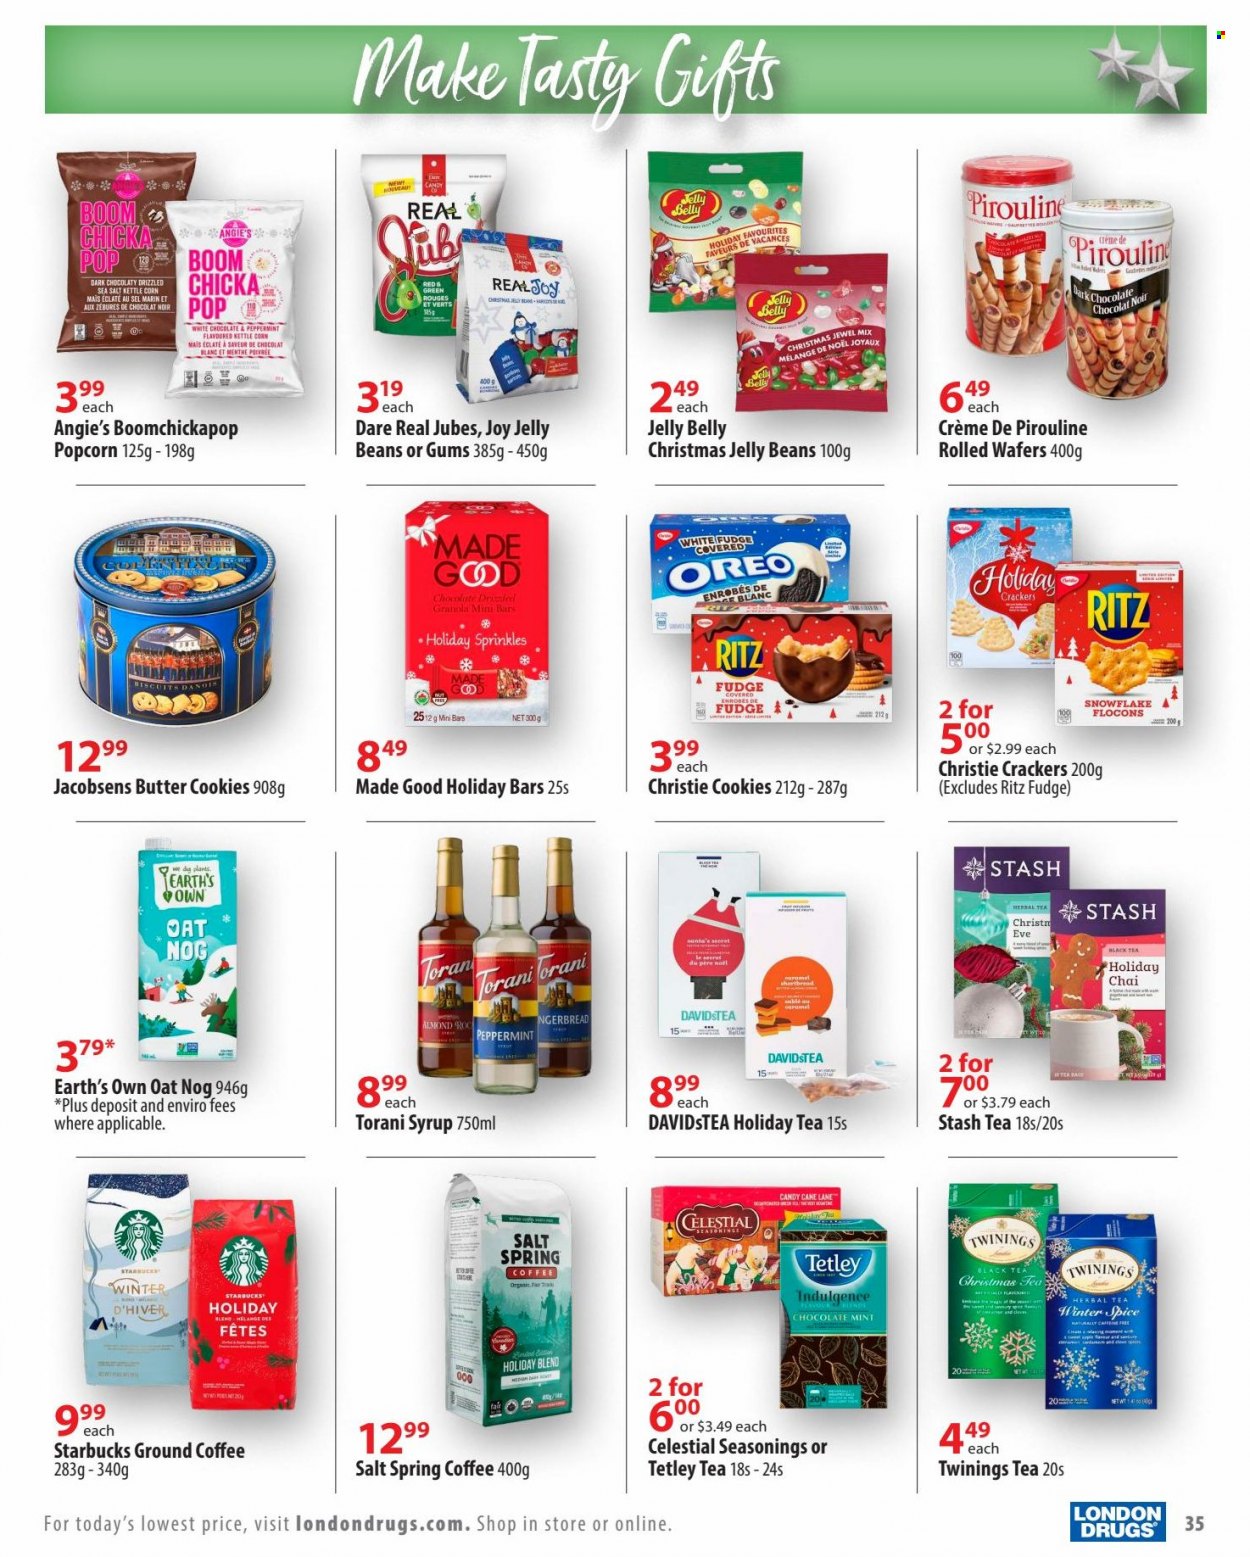 thumbnail - London Drugs Flyer - November 12, 2022 - December 24, 2022 - Sales products - Hewlett Packard, cookies, fudge, wafers, white chocolate, chocolate, butter cookies, candy cane, crackers, Santa, jelly beans, RITZ, kettle corn, popcorn, oats, spice, syrup, tea, herbal tea, Twinings, coffee, ground coffee, Starbucks, Joy, granola, Oreo. Page 35.